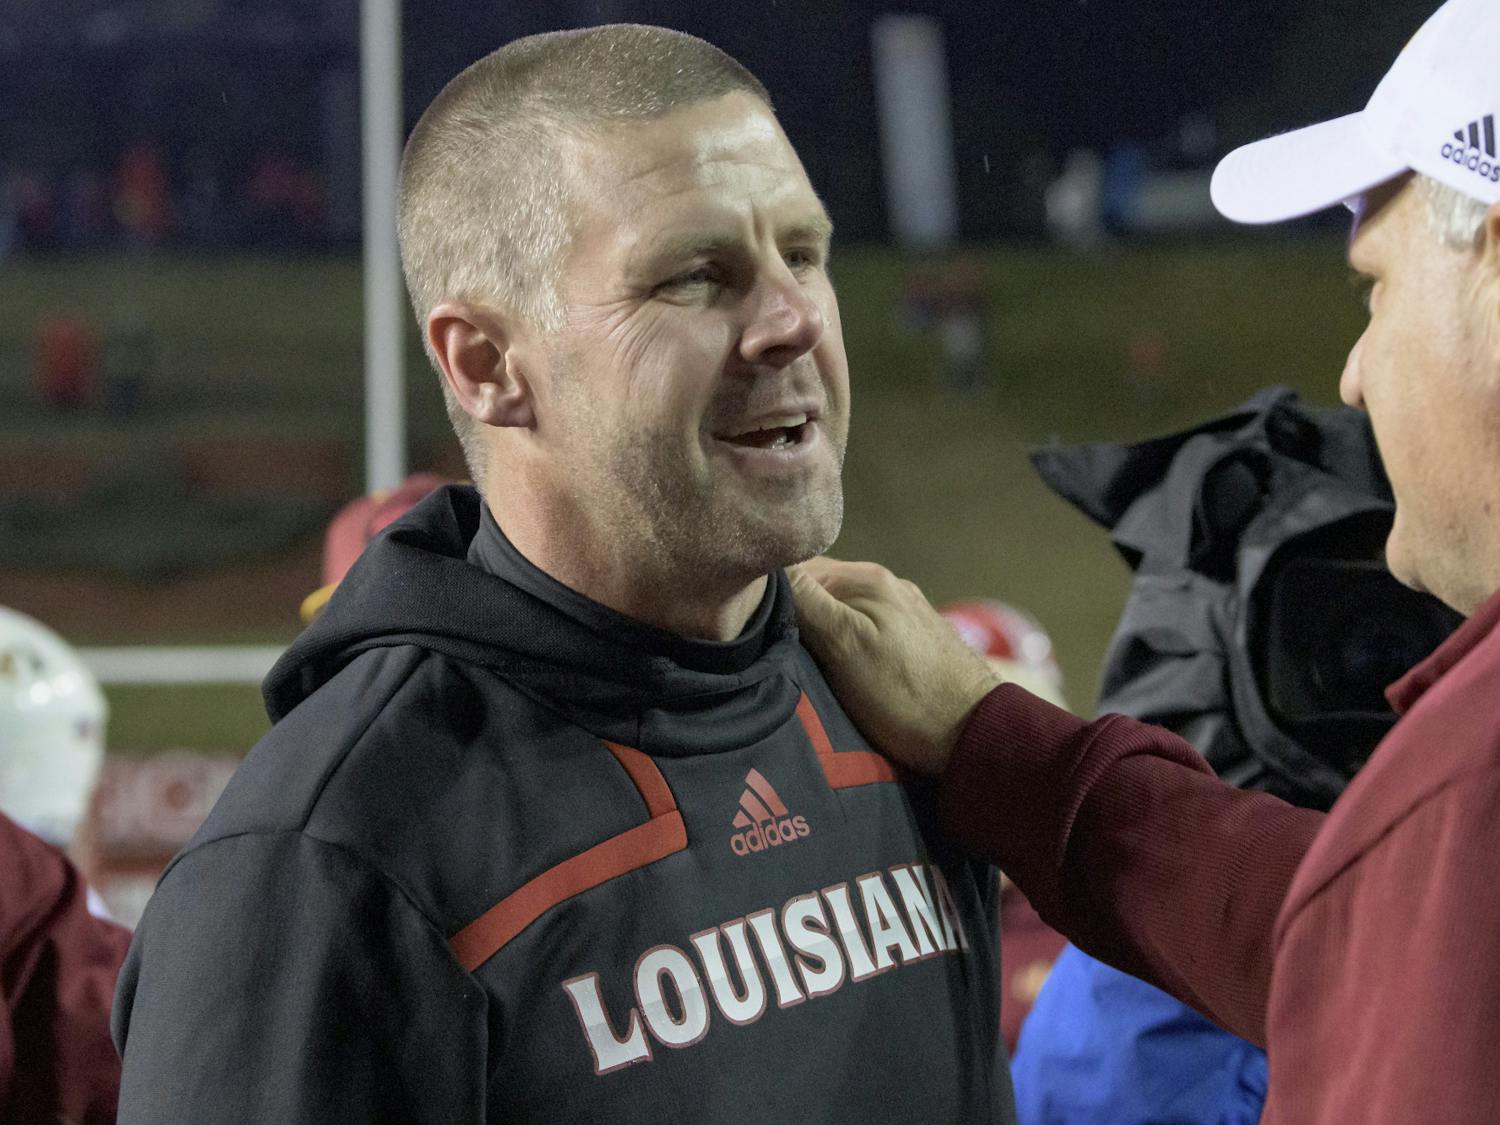 Louisiana-Lafayette head coach Billy Napier is congratulated by Louisiana-Monroe Offensive Coordinator Rich Rodriguez after Louisiana-Lafayette won 21-16 in an NCAA college football game in Lafayette, La., Saturday, Nov. 27, 2021. (AP Photo/Matthew Hinton) Napier will be reunited with former running back Montreal Johnson in Gainesville next year.